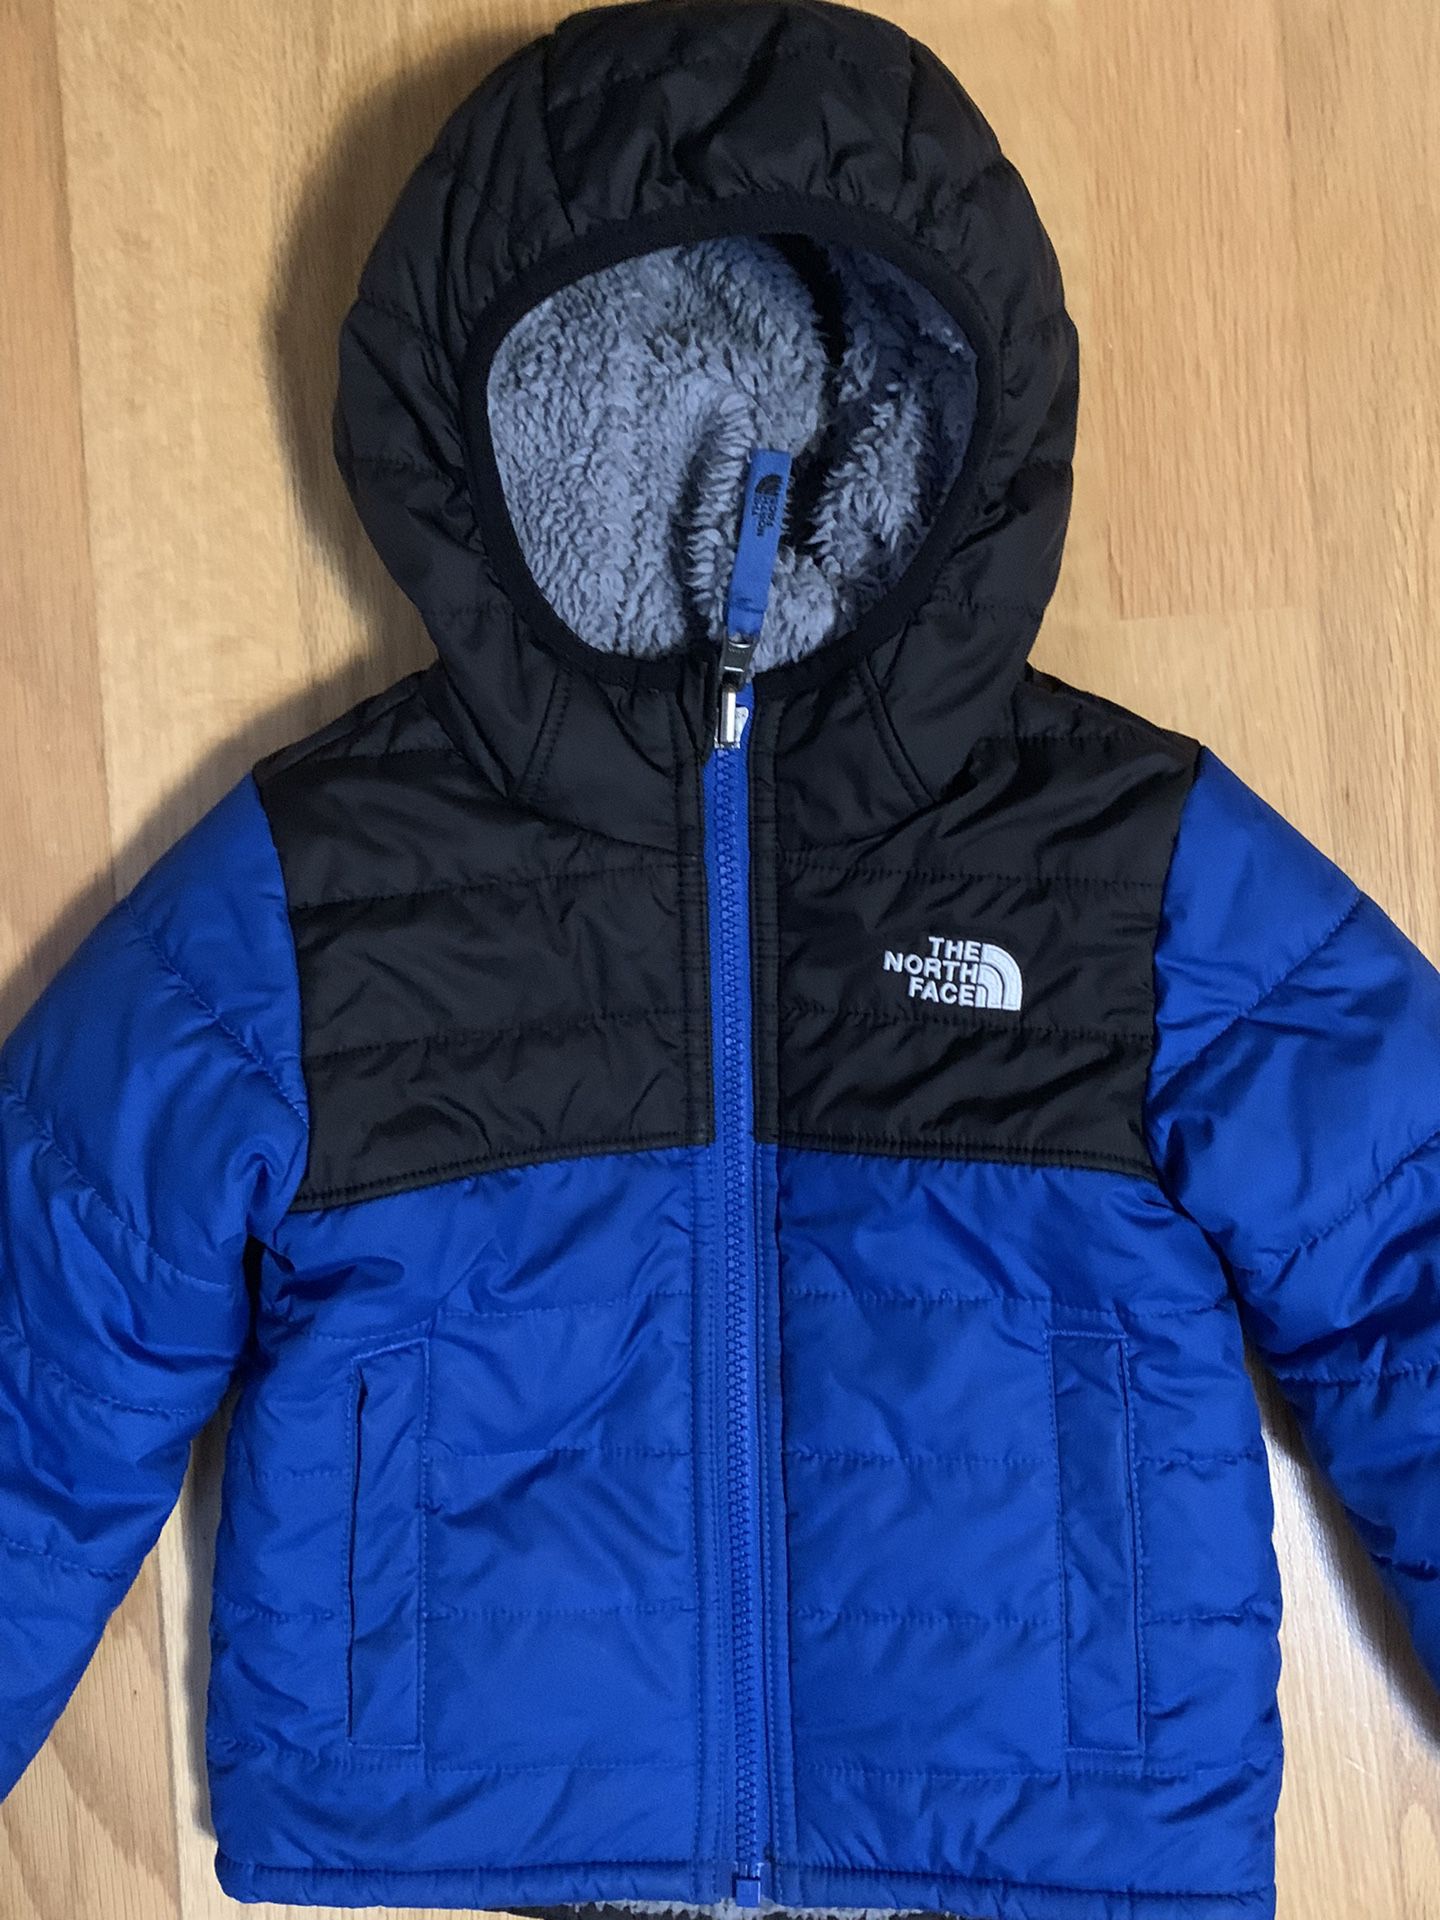 The North Face Reversible Jacket. Size 3 T